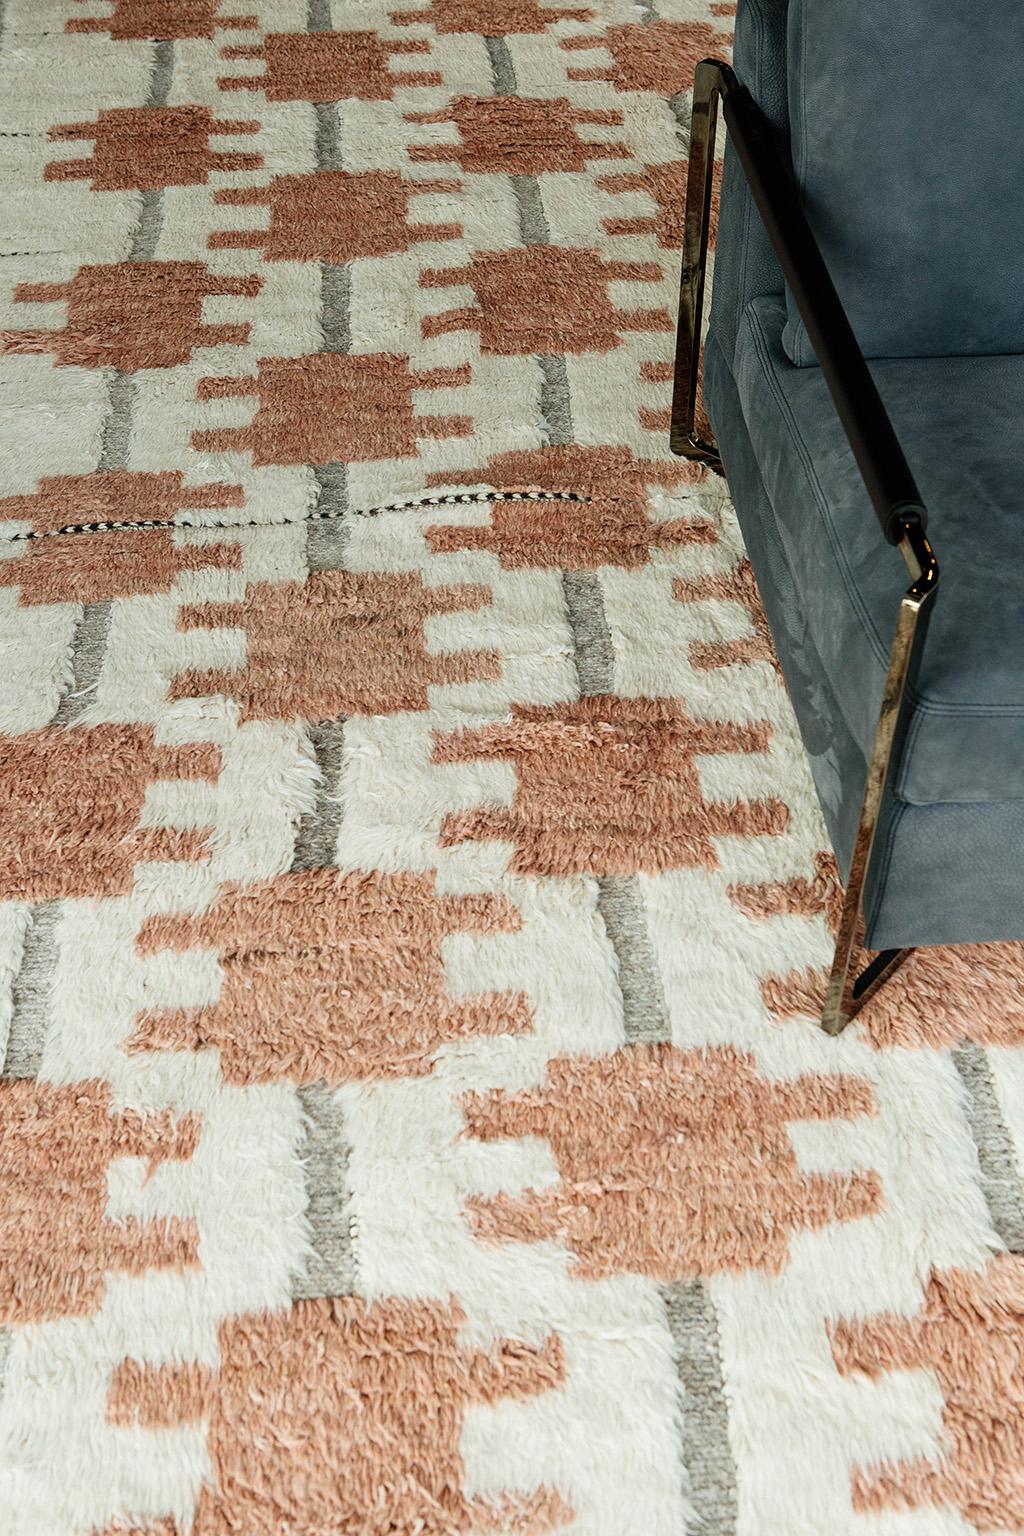 Designed is LA 'Umea' is made up of luxurious handwoven wool, inspired by vintage Scandinavian design elements, and recreated for the modern design world. 'Kust' also meaning 'coast' was consciously designed for a proper coastal lifestyle.



Rug